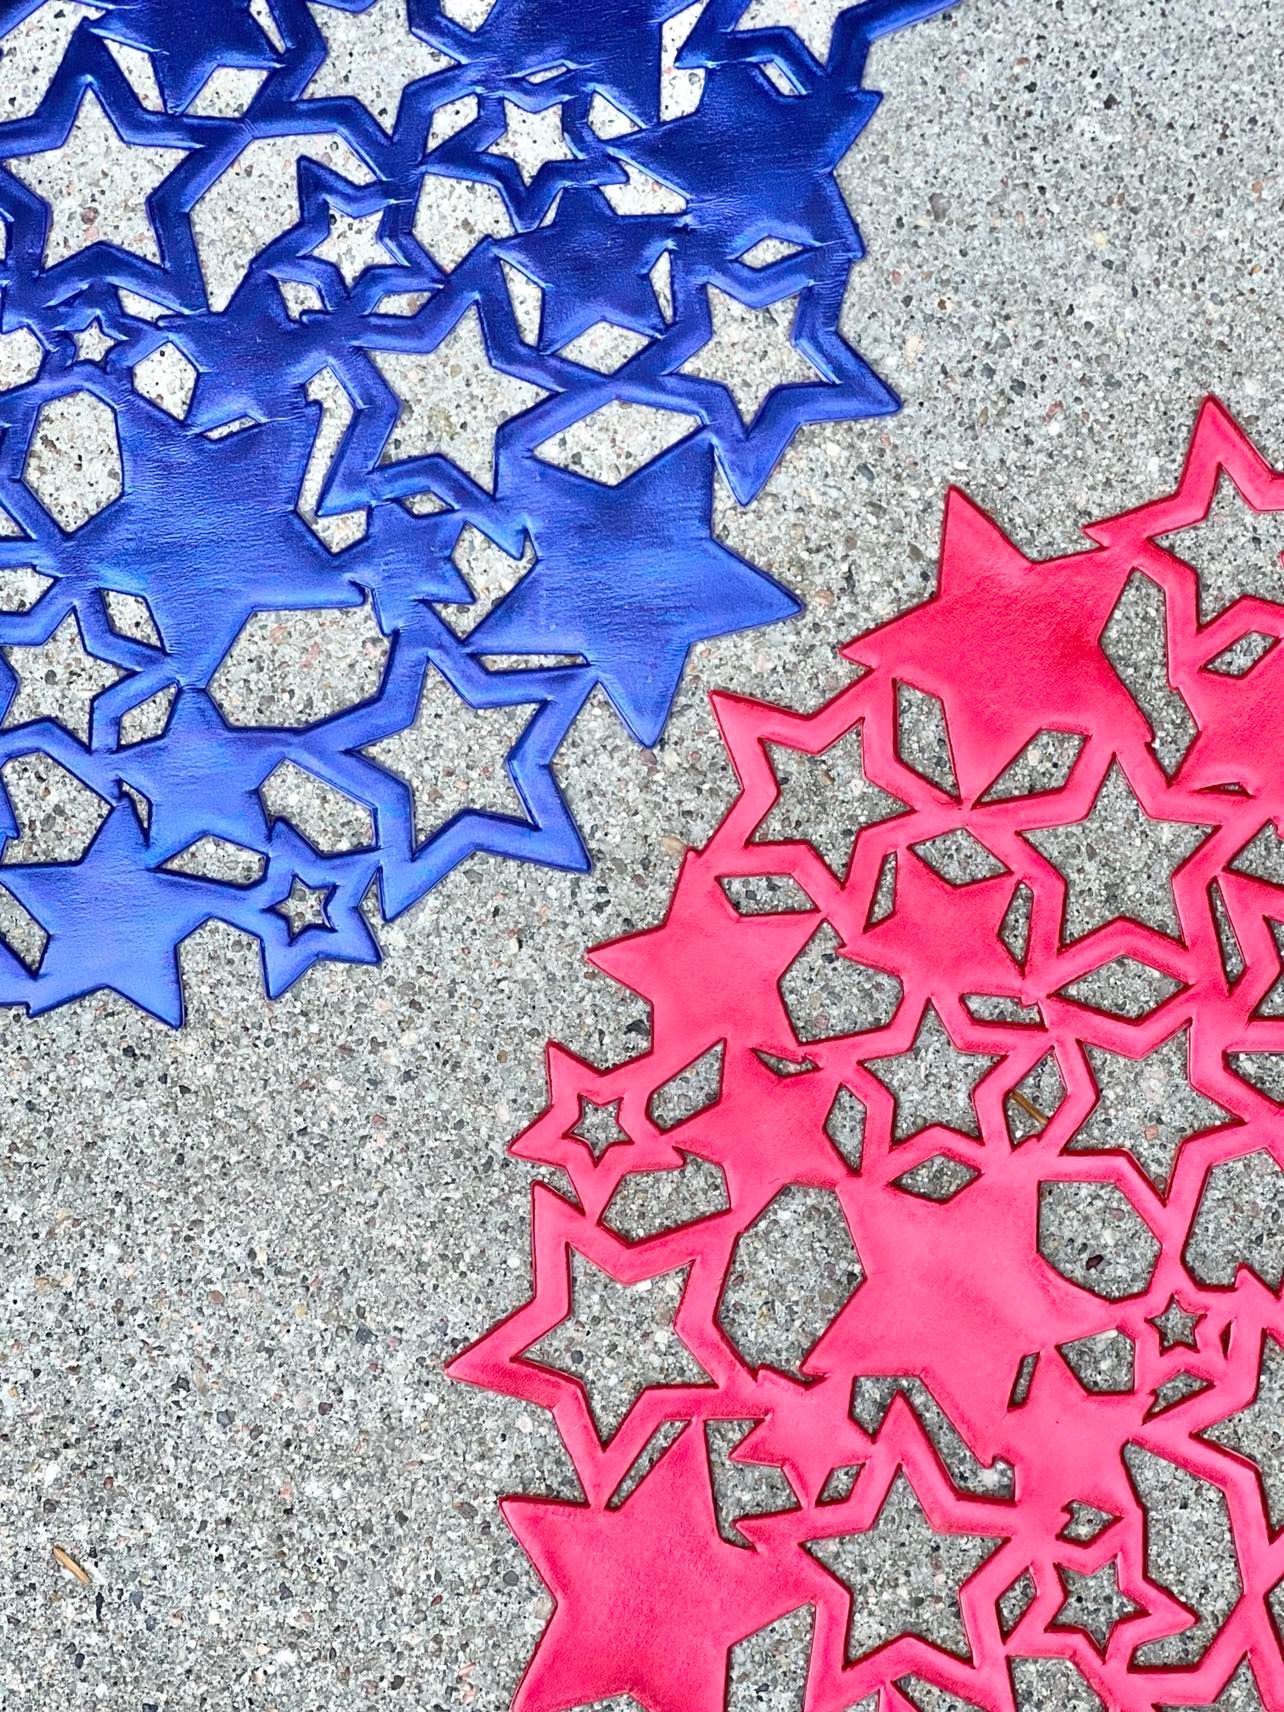 7 Simple Ways to Decorate Your Porch for July 4th